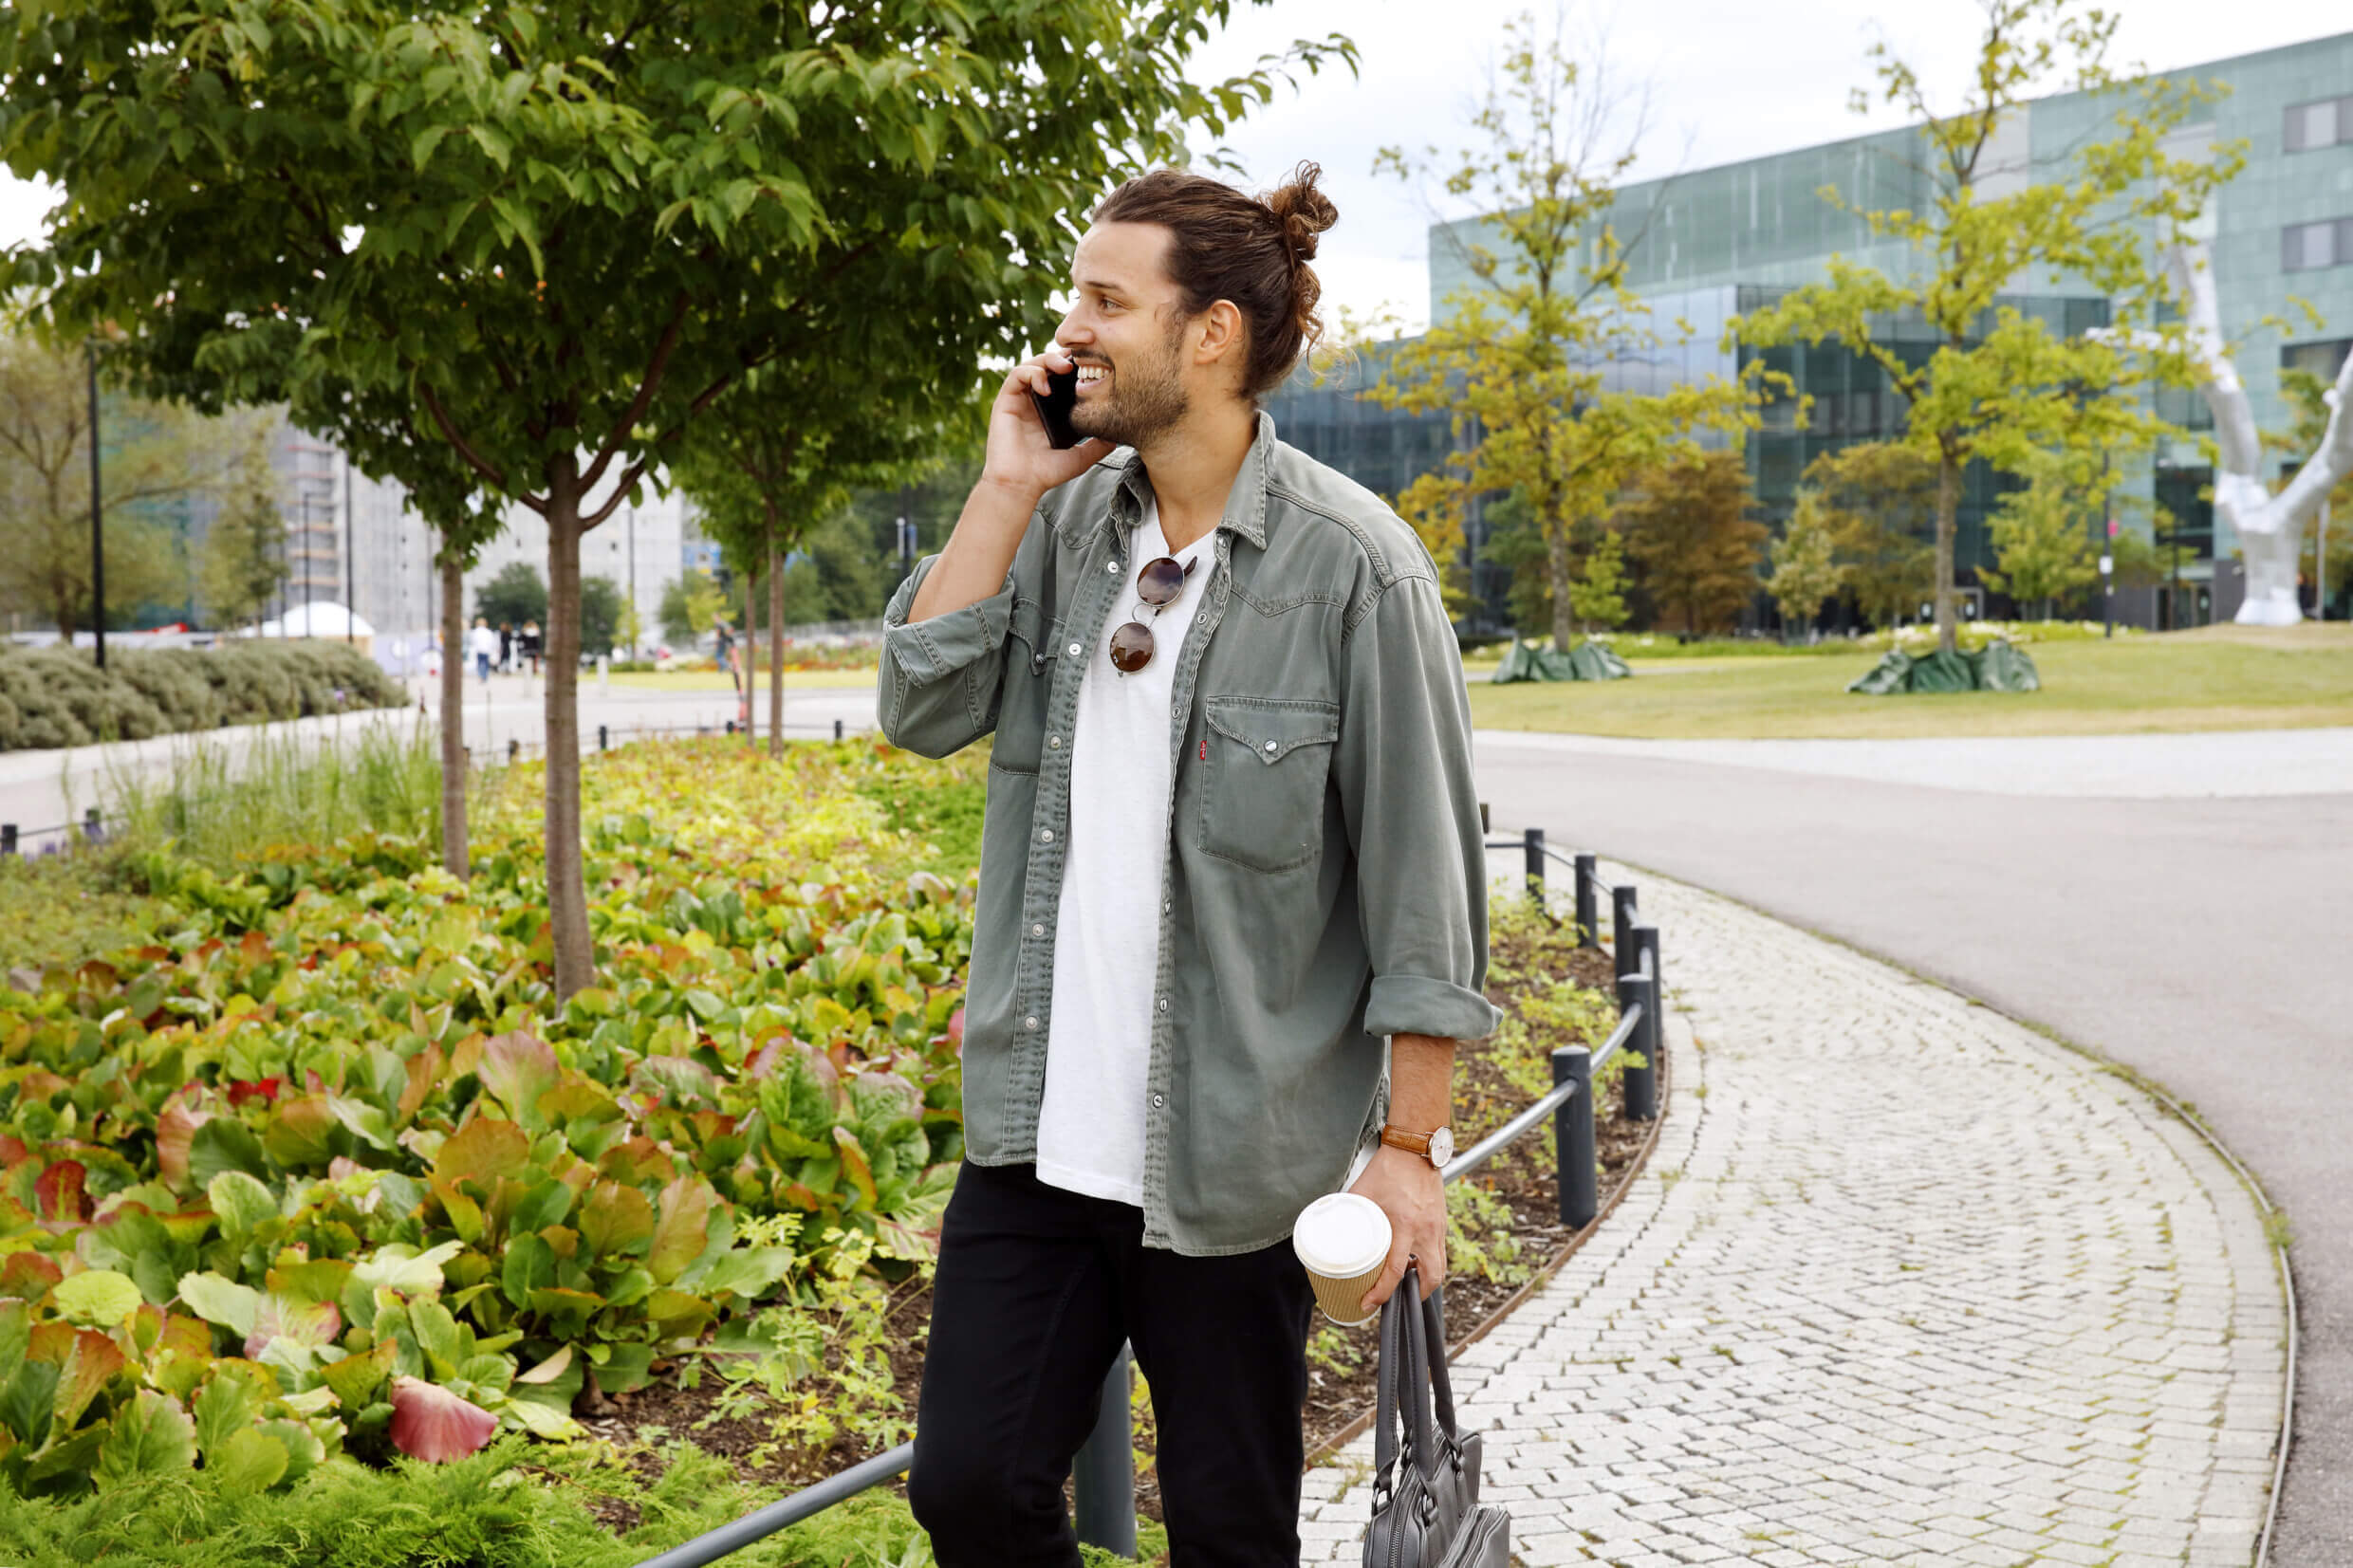 A man talks on the phone outside of an office complex.